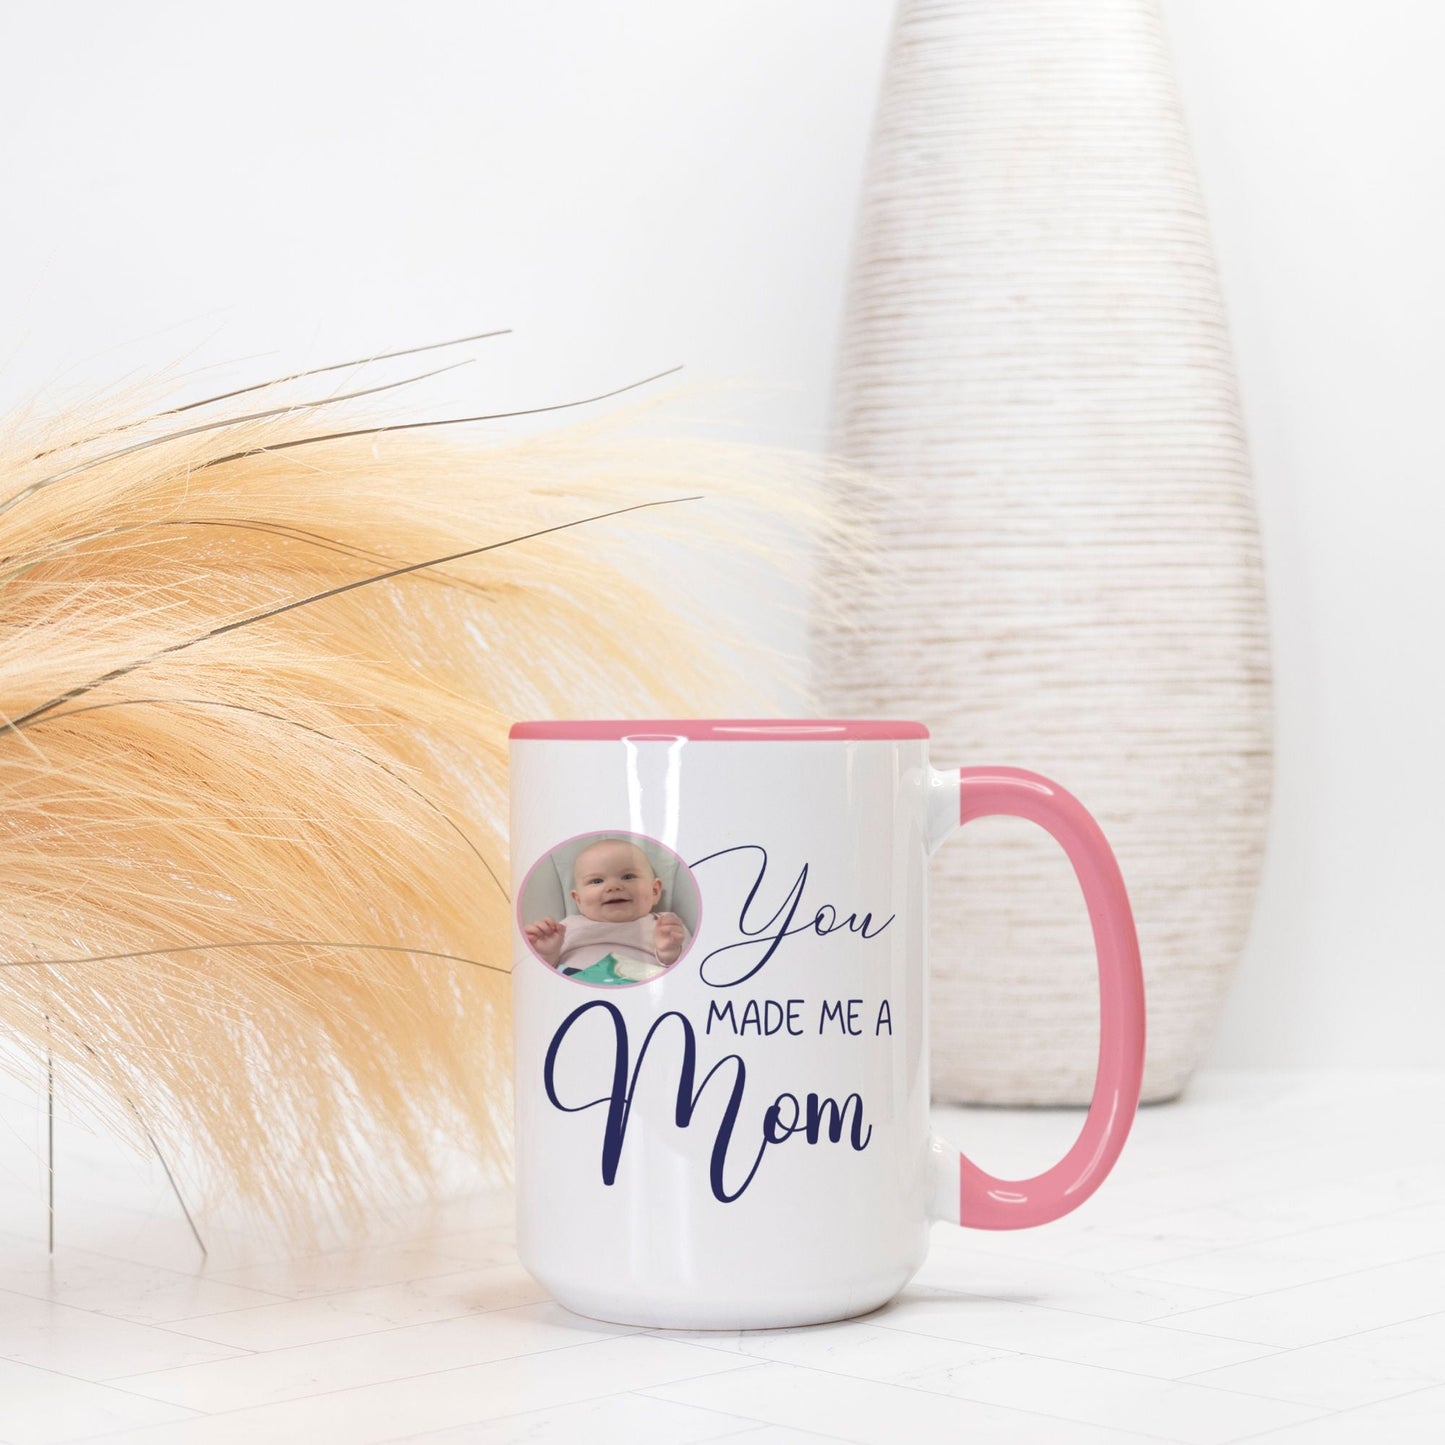 You Made Me a Mom Mug Deluxe 15oz. (Pink + White) - Twinklette